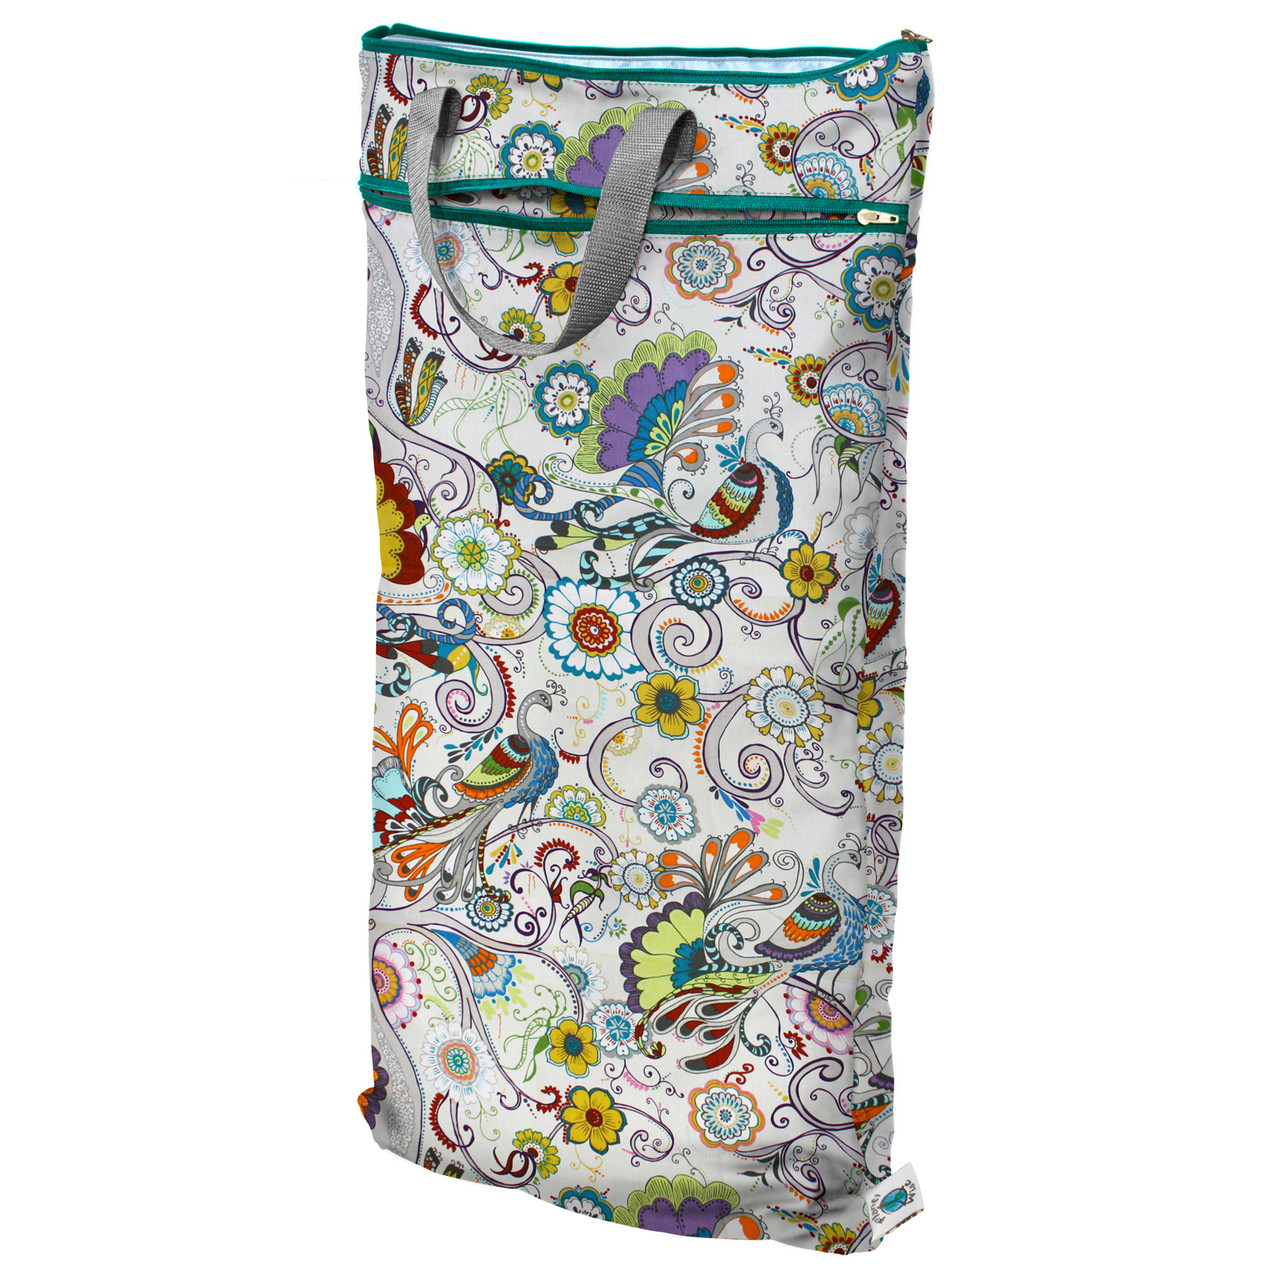 Planet Wise Hanging Wet/Dry Bag - Parents' Favorite